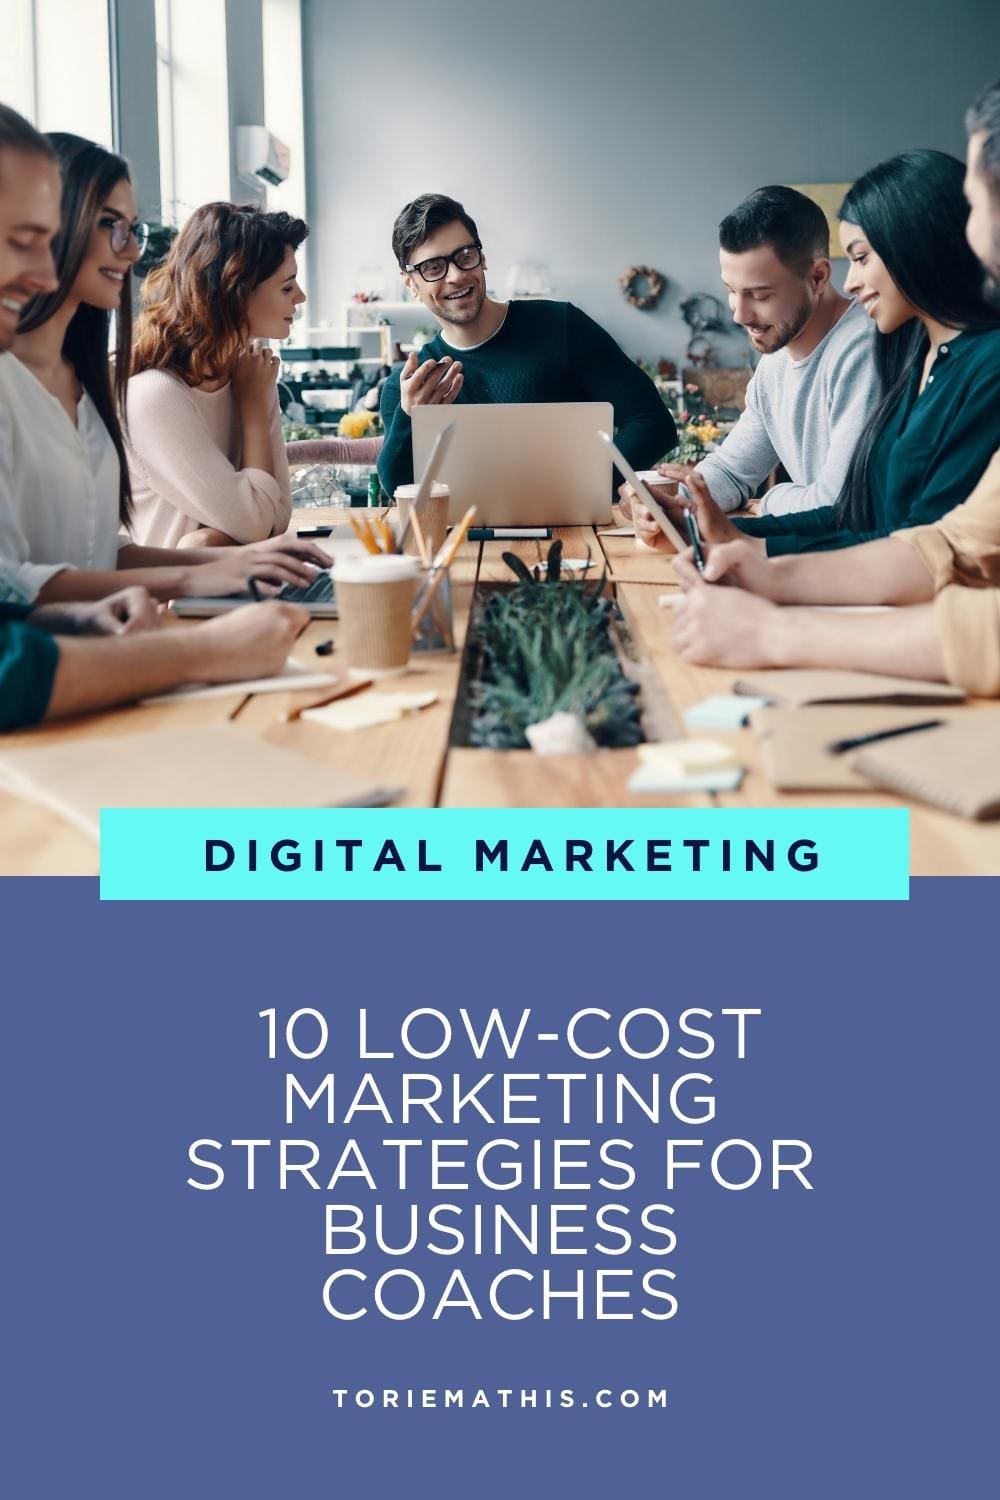 10 Low-Cost Marketing Strategies for Business Coaches